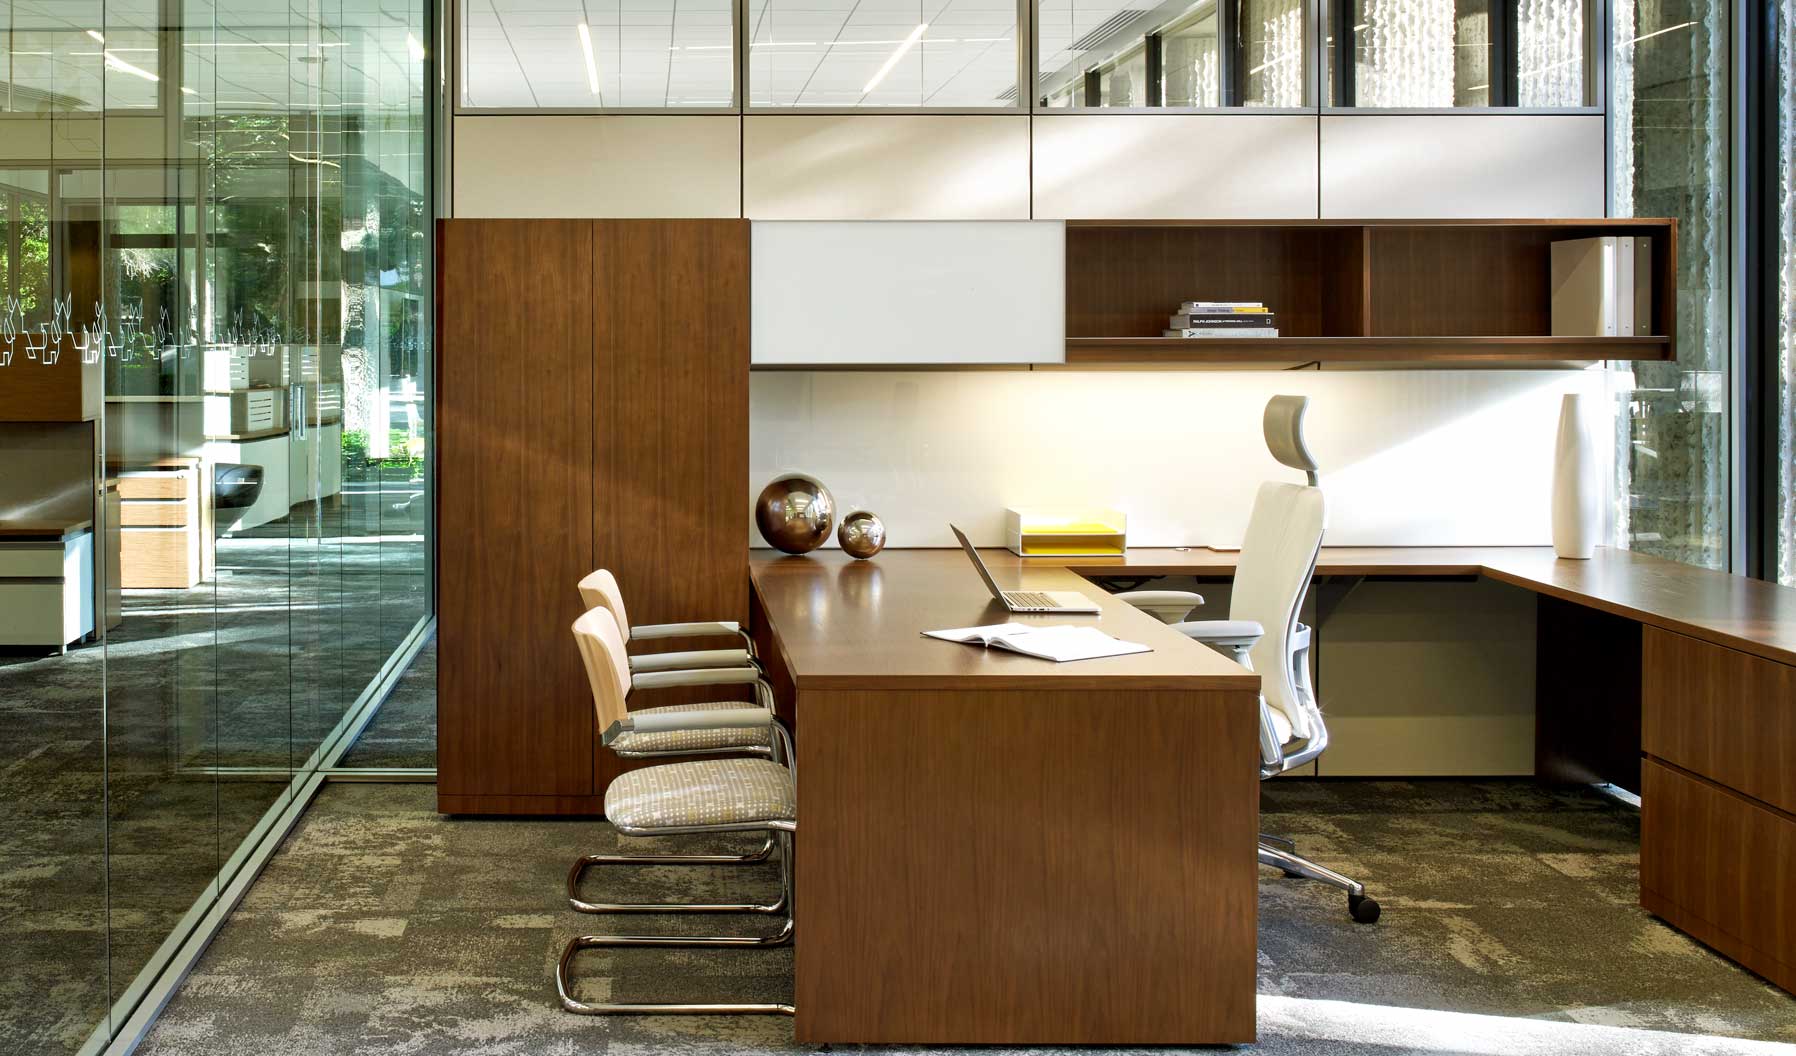 This traditional private office supports both focused, heads-down work as well as transactional interaction with guests. Additionally, it provides both open and enclosed storage, as well as surfaces to annotate and pin up. The use of glass connects this c-suite positioned private office to the greater office environment.